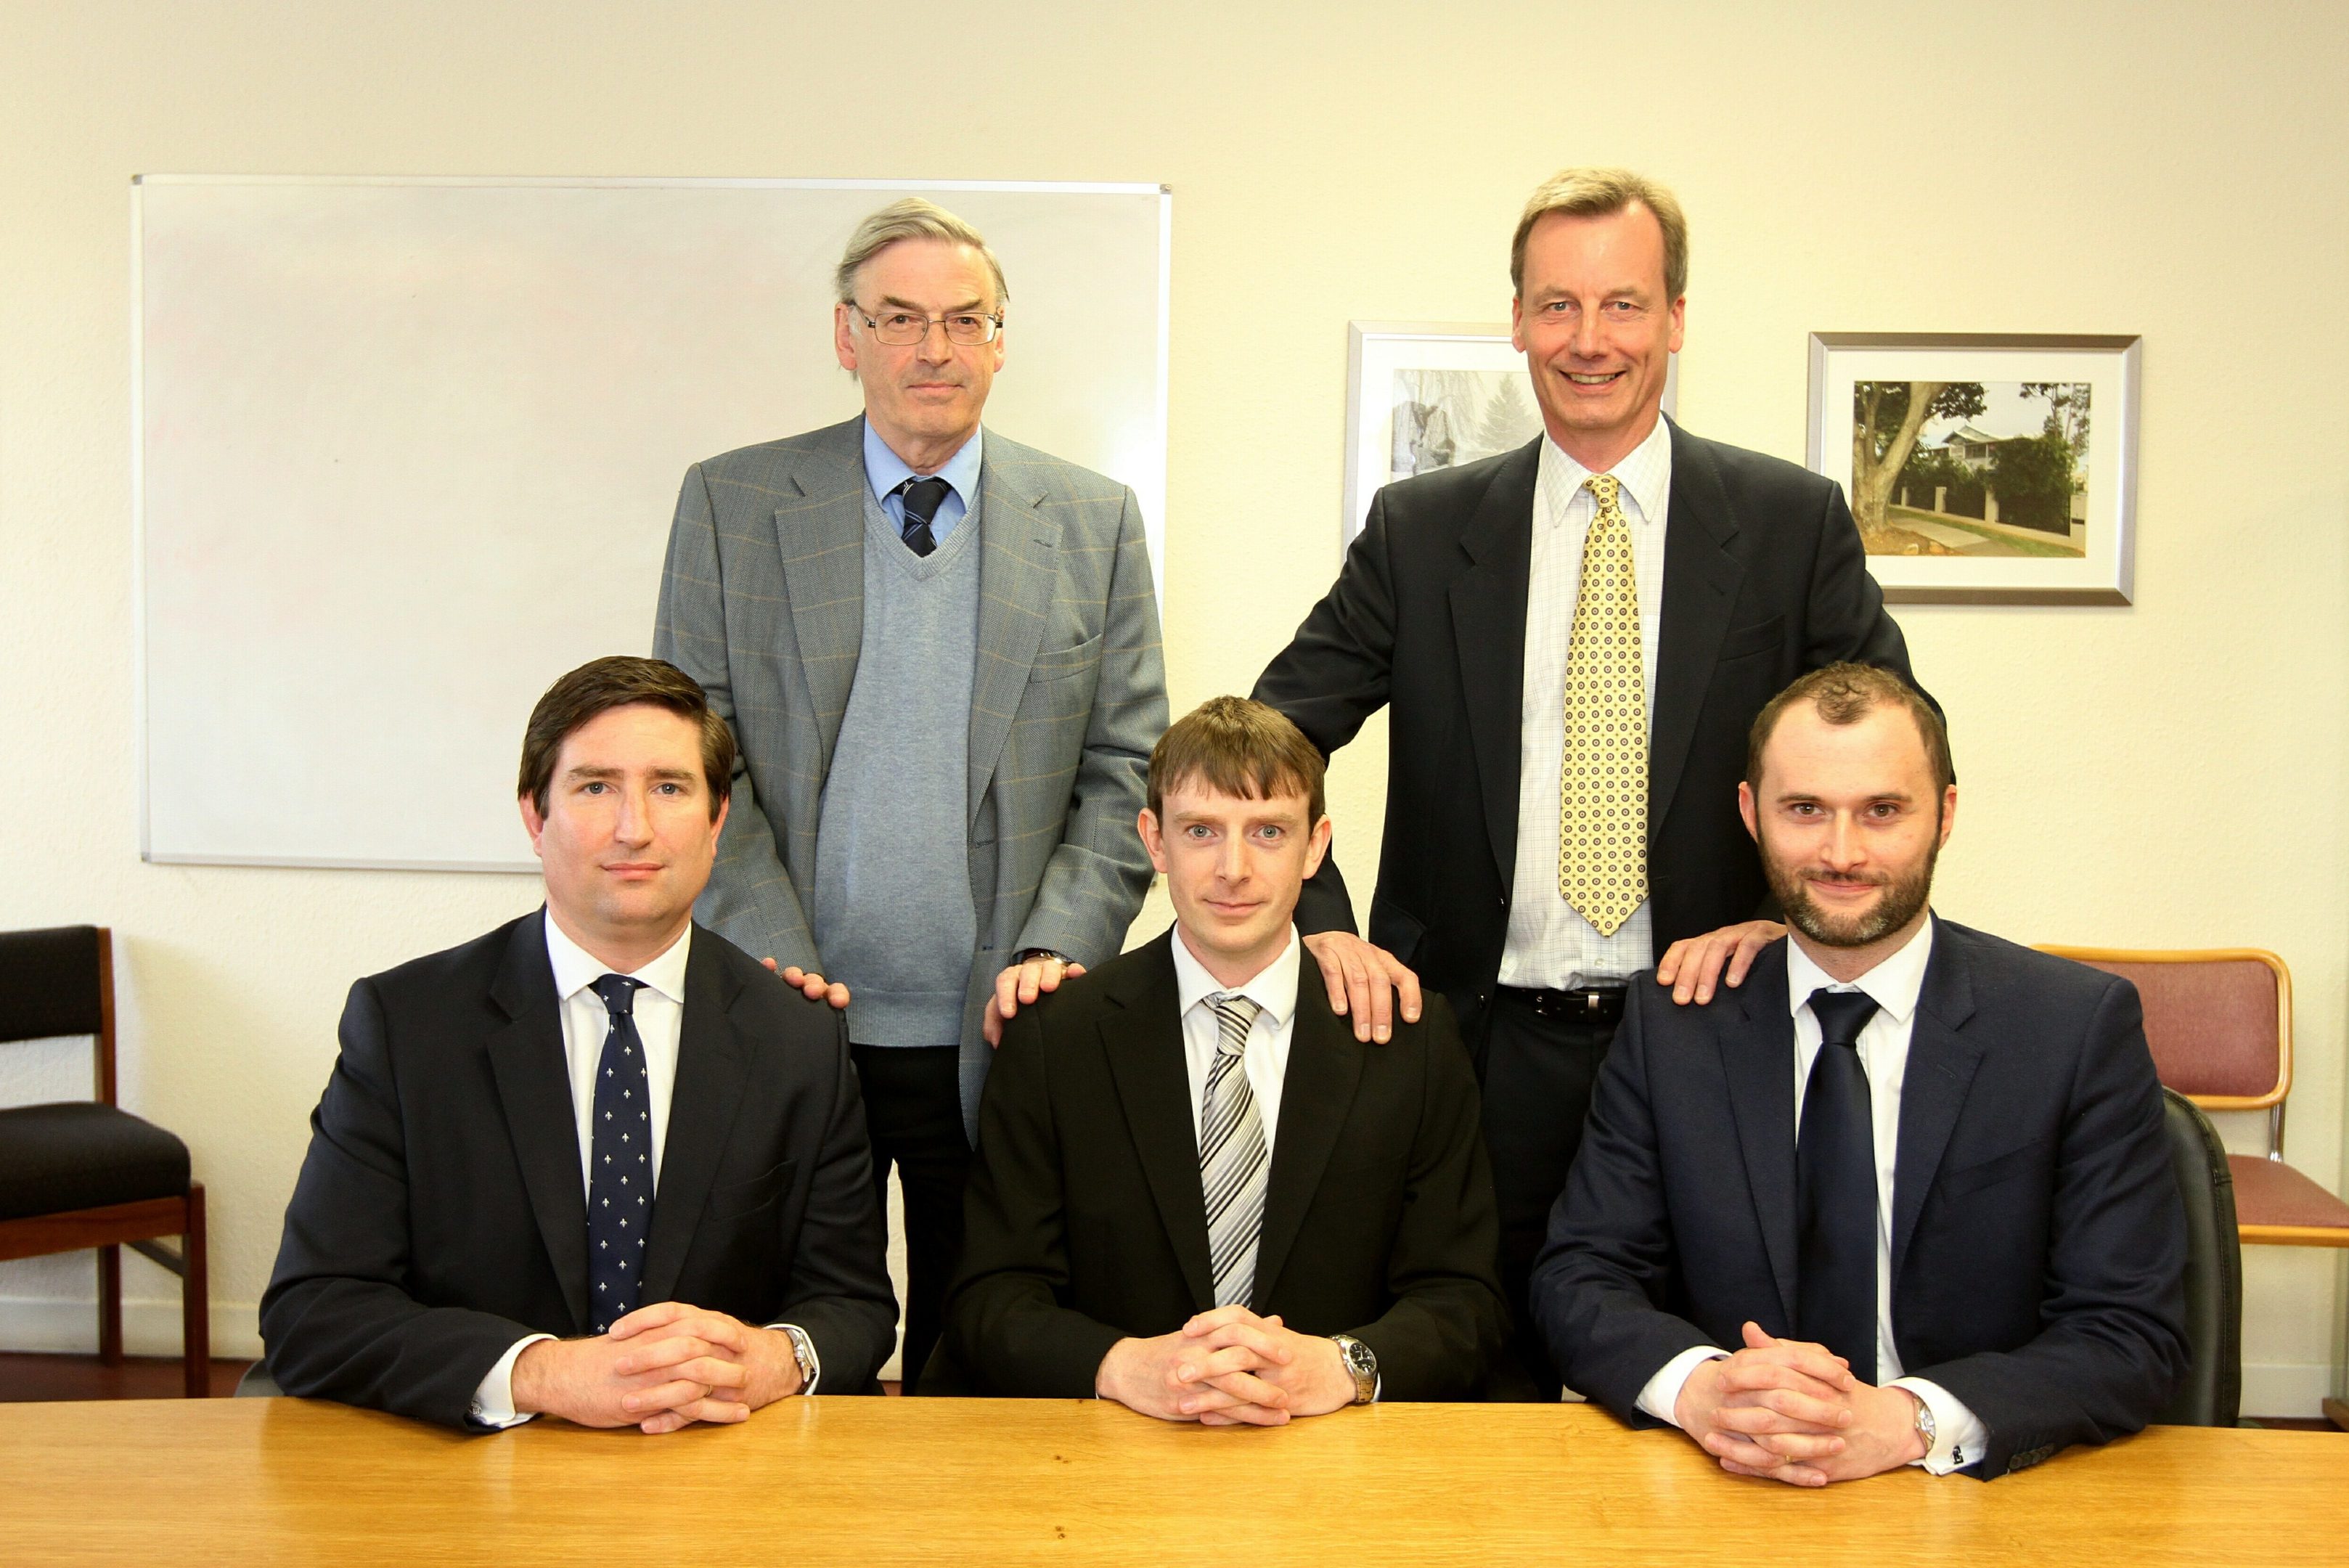 Seated are the new J&D Wilkie board of Roger McGill (Finance Director), Hamish Roweuan (joint Managing Director) and Jean- Christophe Gravier(joint Managing Director), with the old board standing of Mike Rowan and Bob Low.